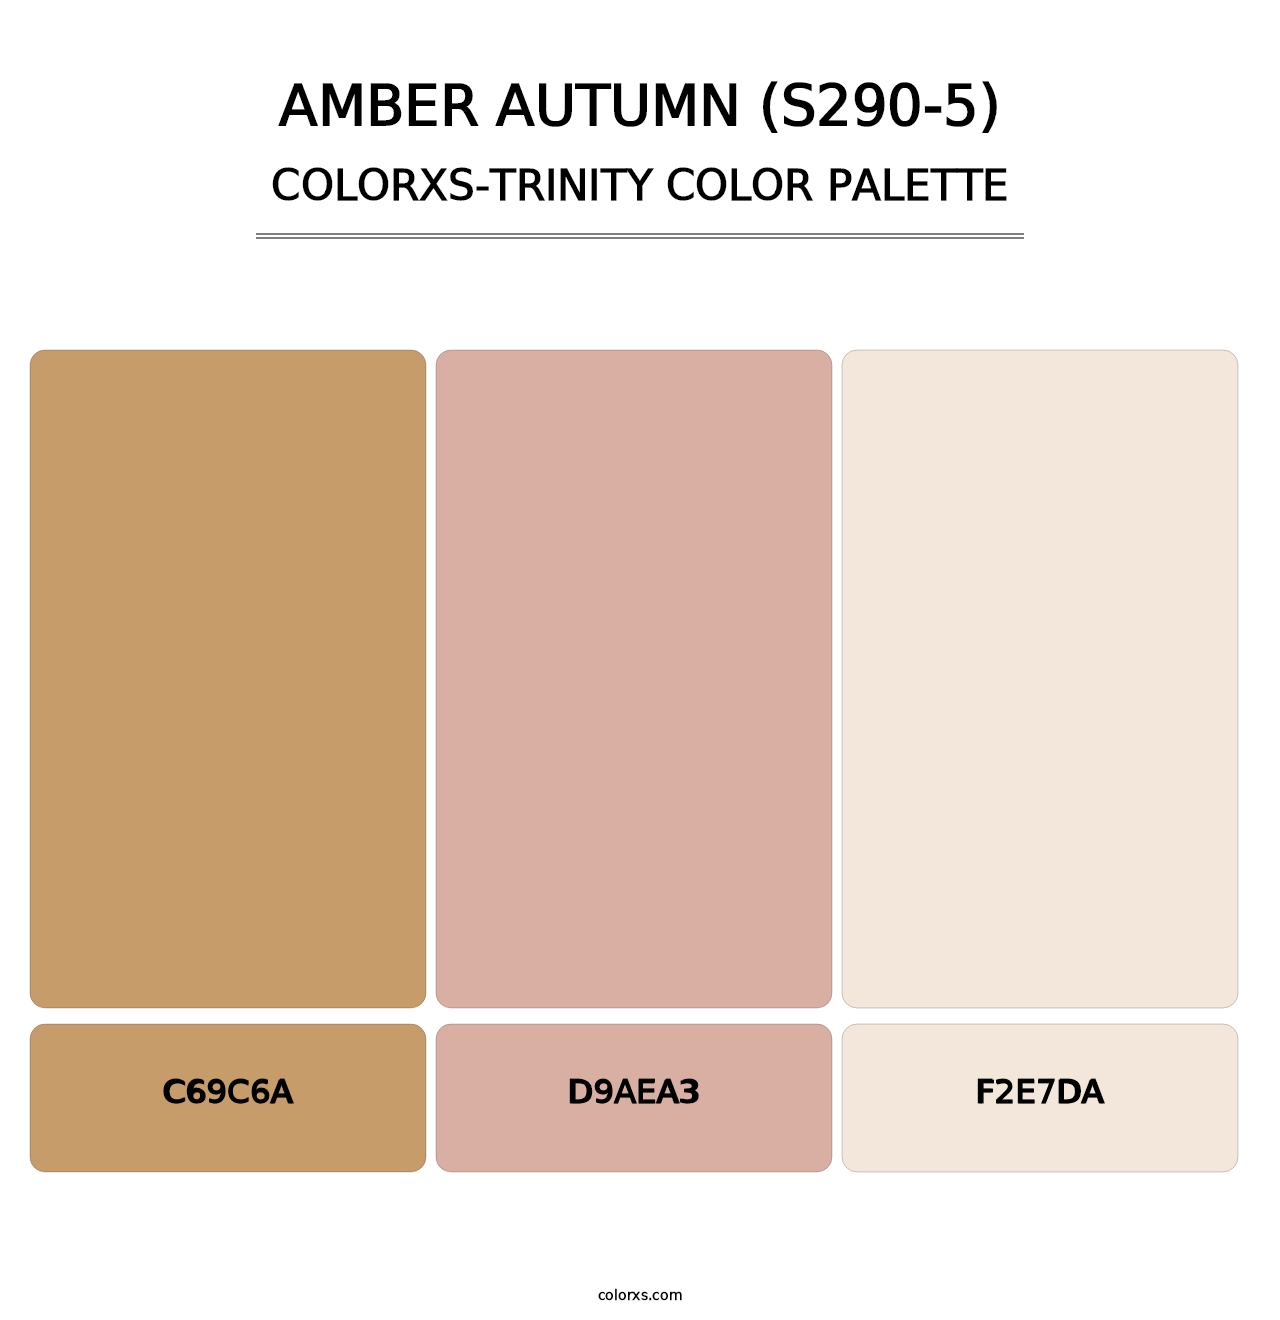 Amber Autumn (S290-5) - Colorxs Trinity Palette